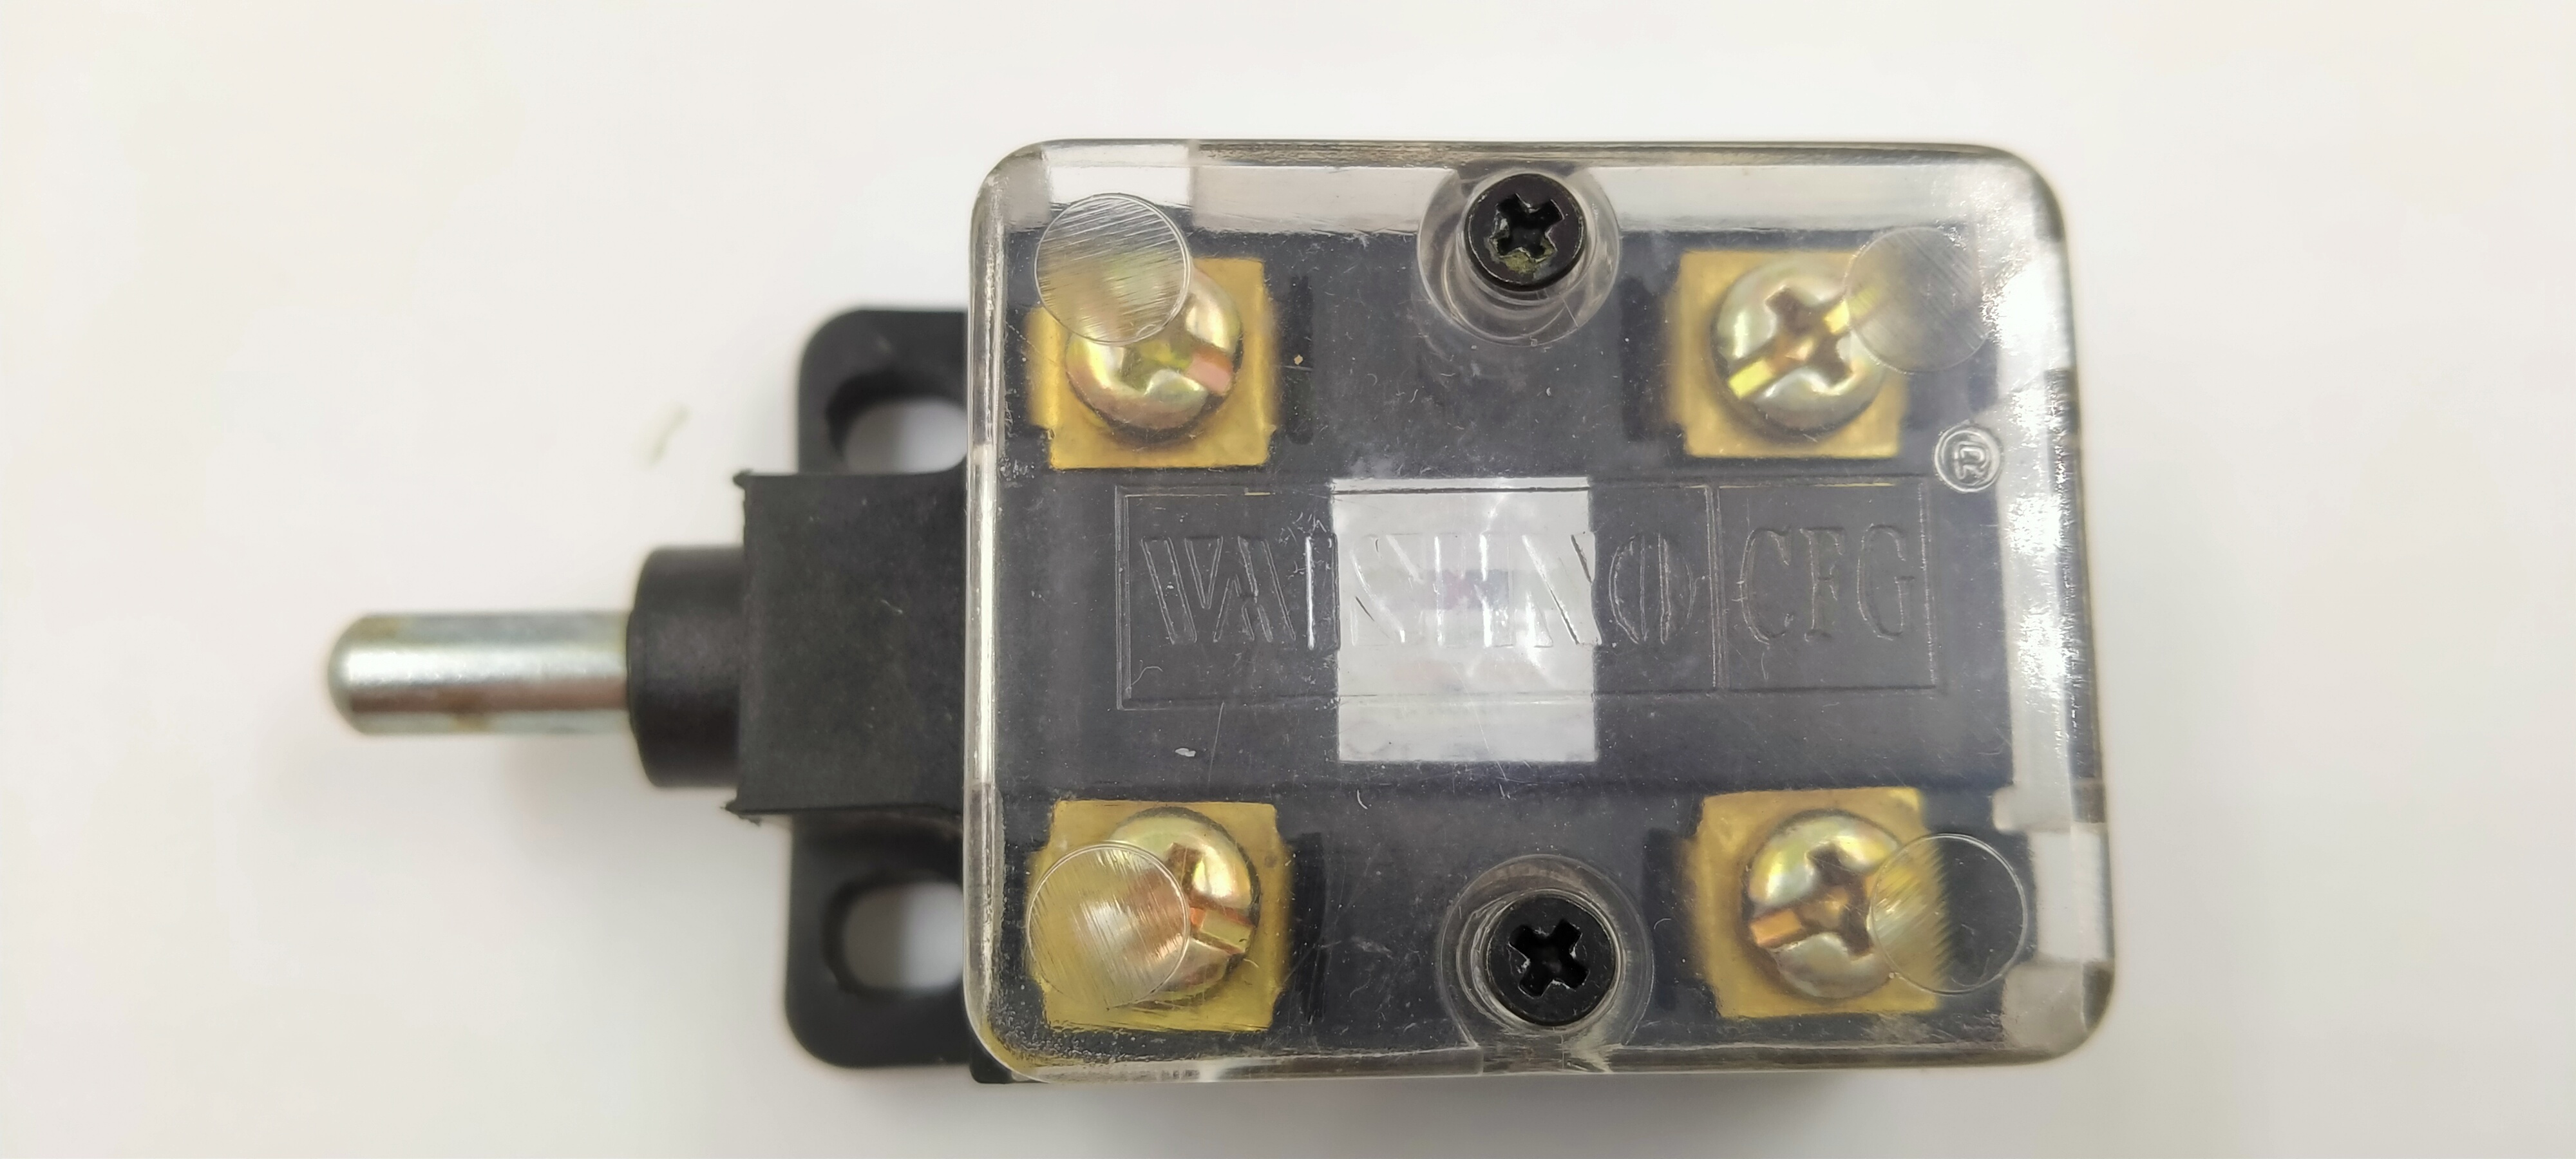 Switch Operating Lever SPS-HS-507